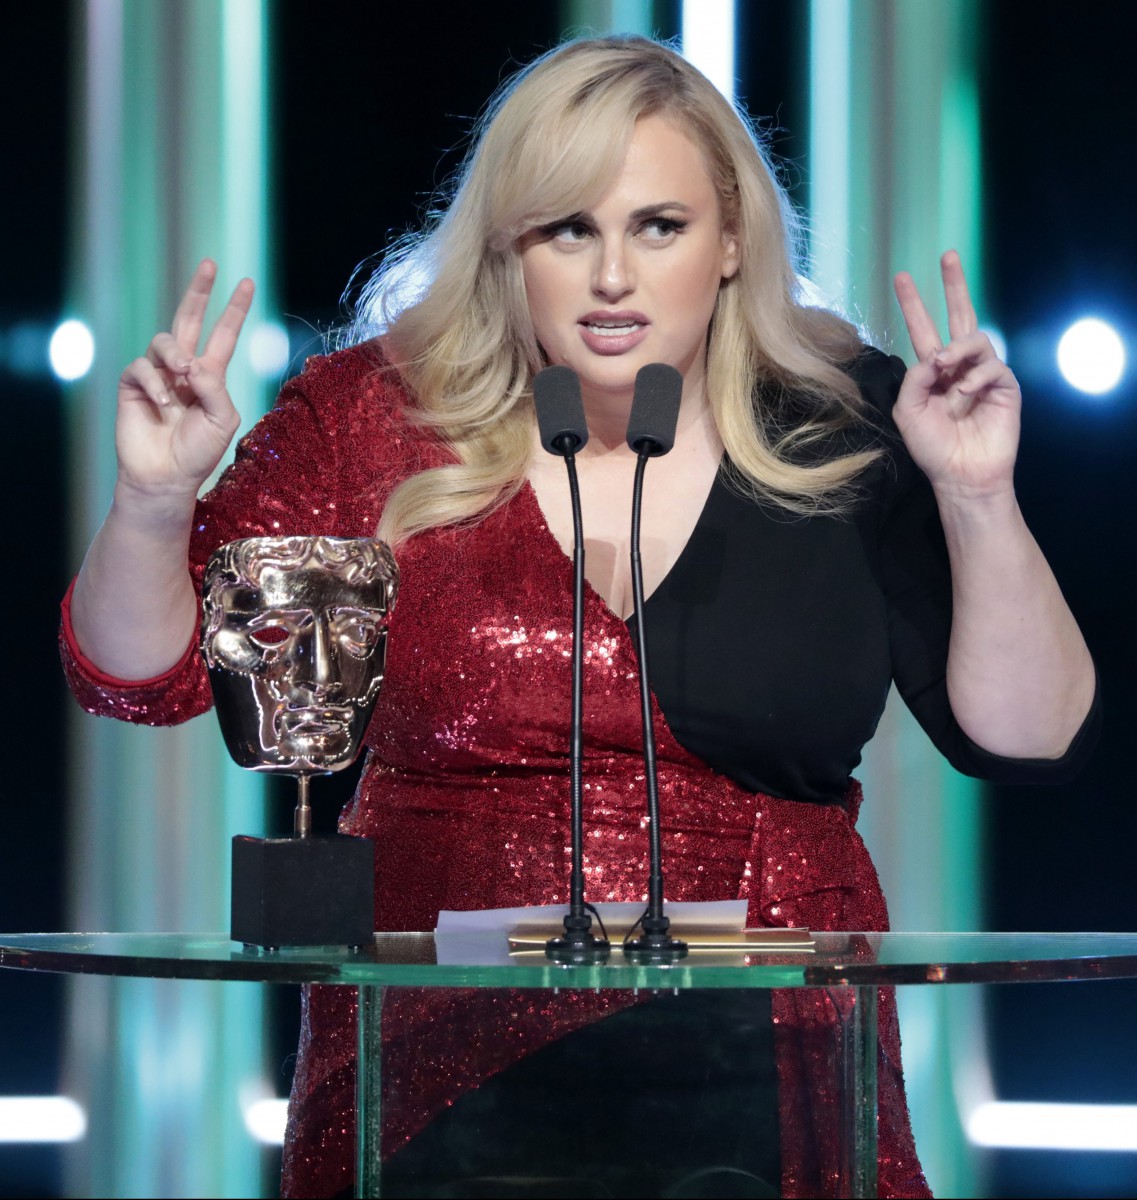 Rebel Wilson got a dig in about the all-male Best Director shortlist